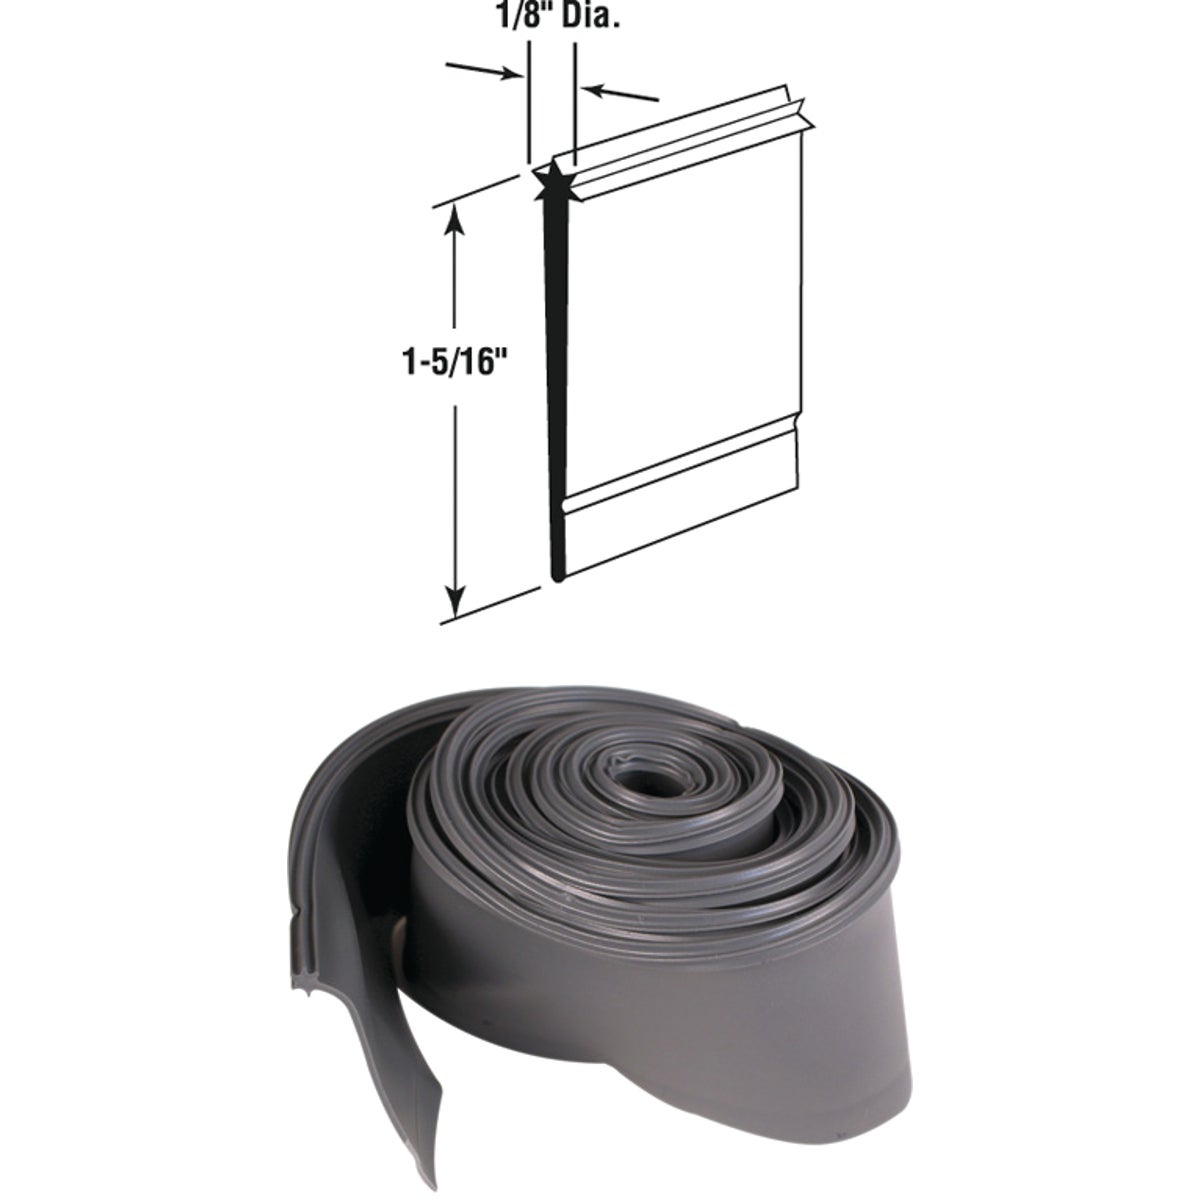 Item 259004, This sweep is made of clear extruded vinyl and easily mounts to the bottom 